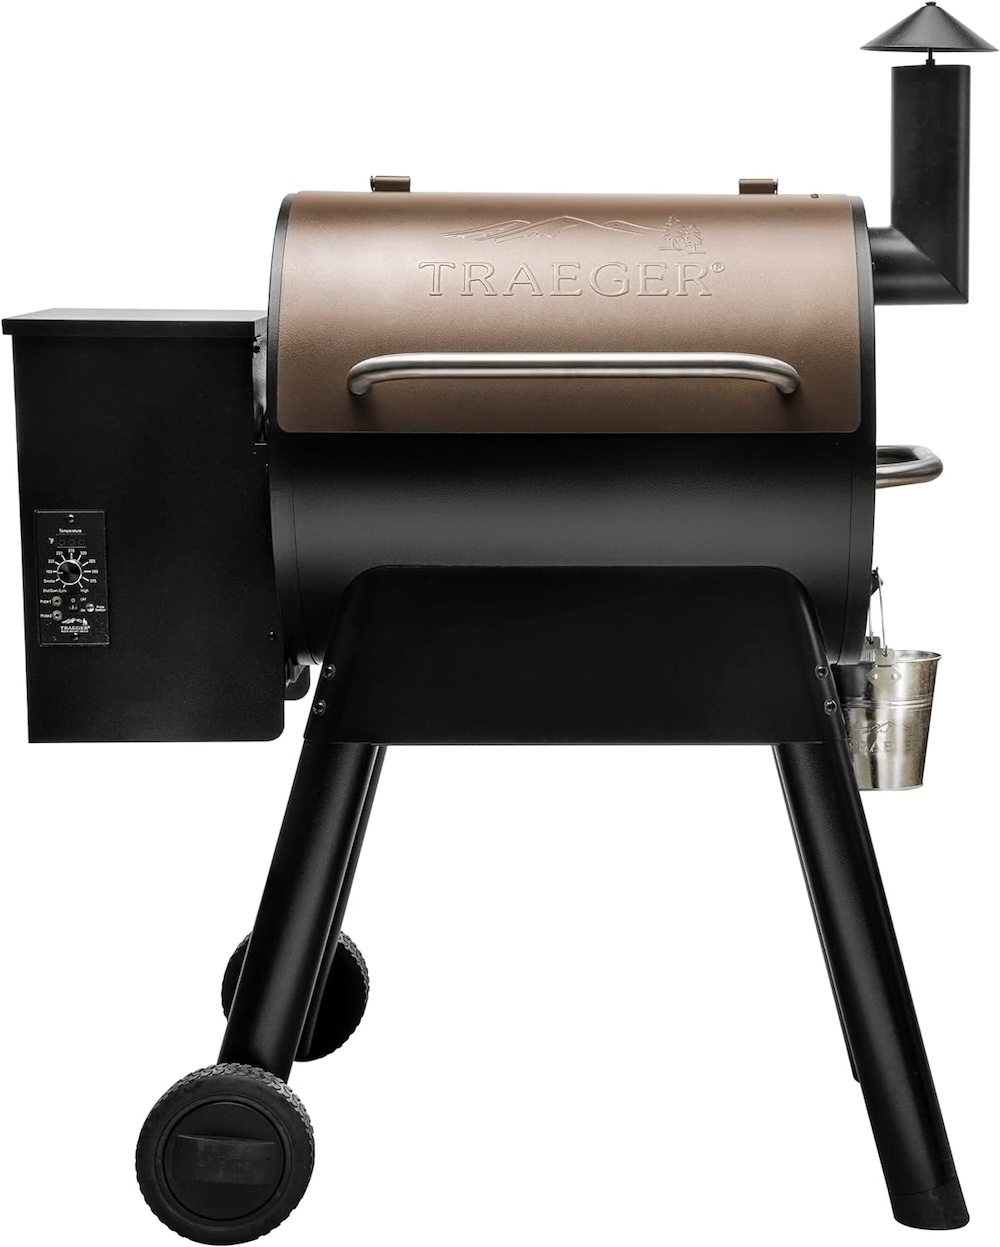 A Traeger Pro 22 Electric wood pellet grill and smoker